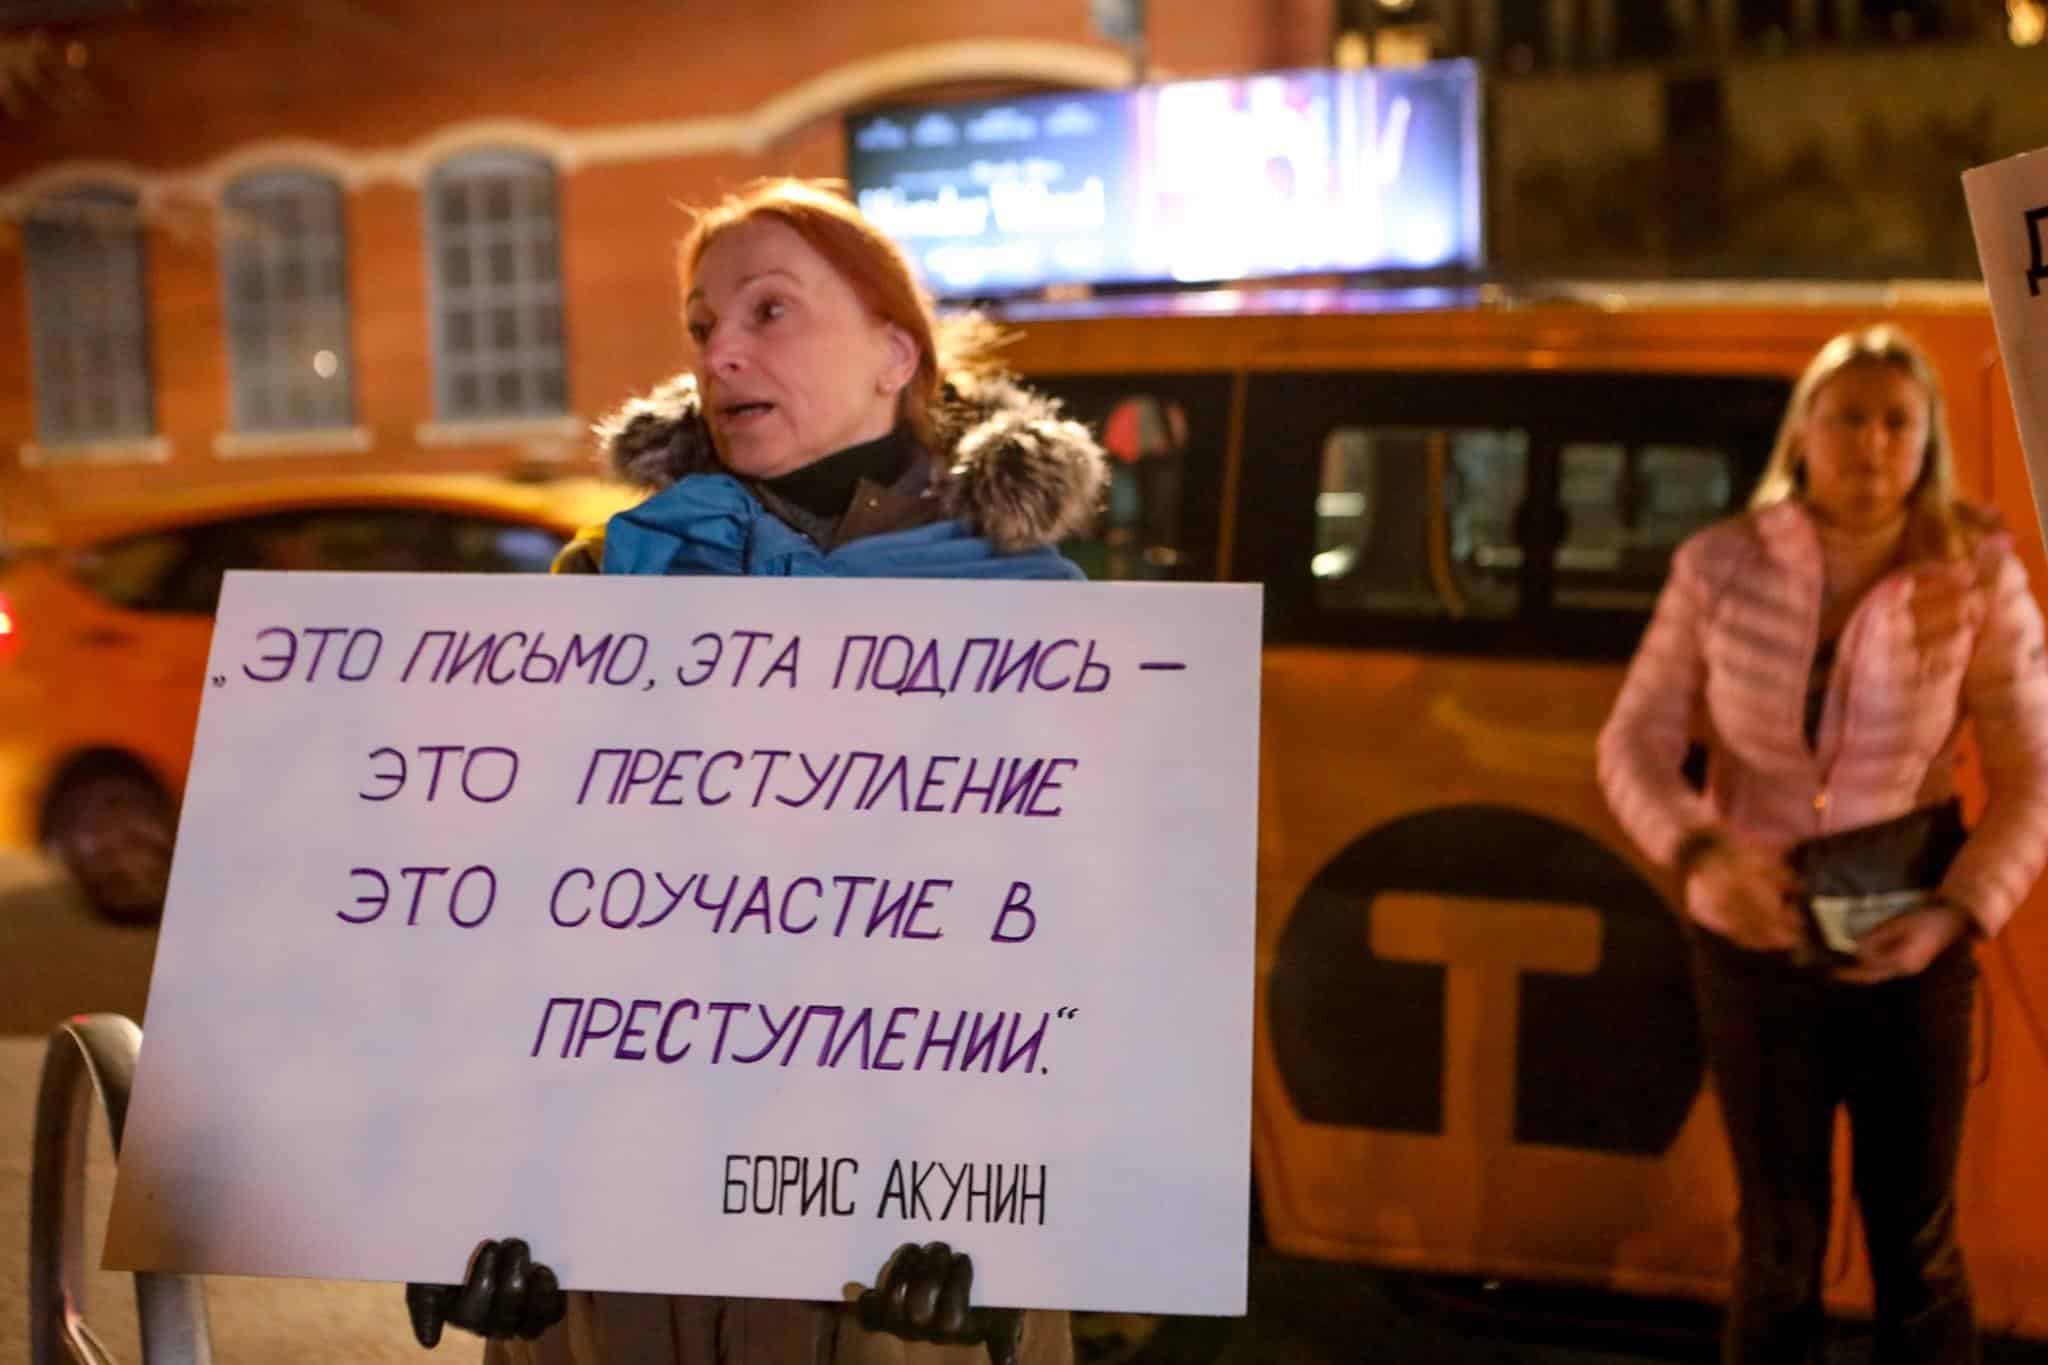 Activists staged a picket at the premiere of «Matilda» in new York